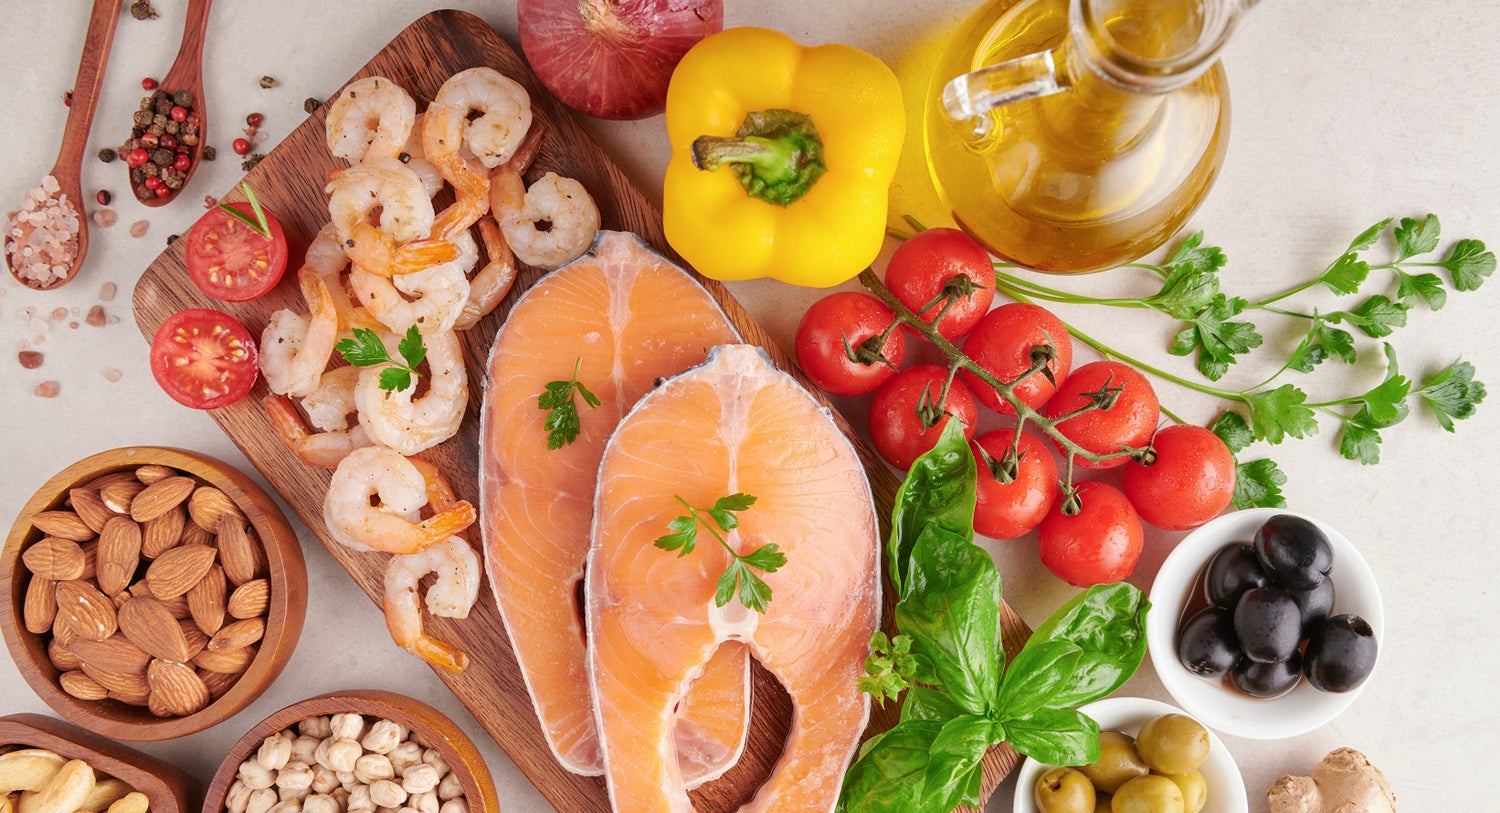 A variety of healthy foods including salmon, shrimp, cherry tomatoes, yellow bell pepper, basil, olives, almonds, chickpeas, and olive oil arranged on a light surface.